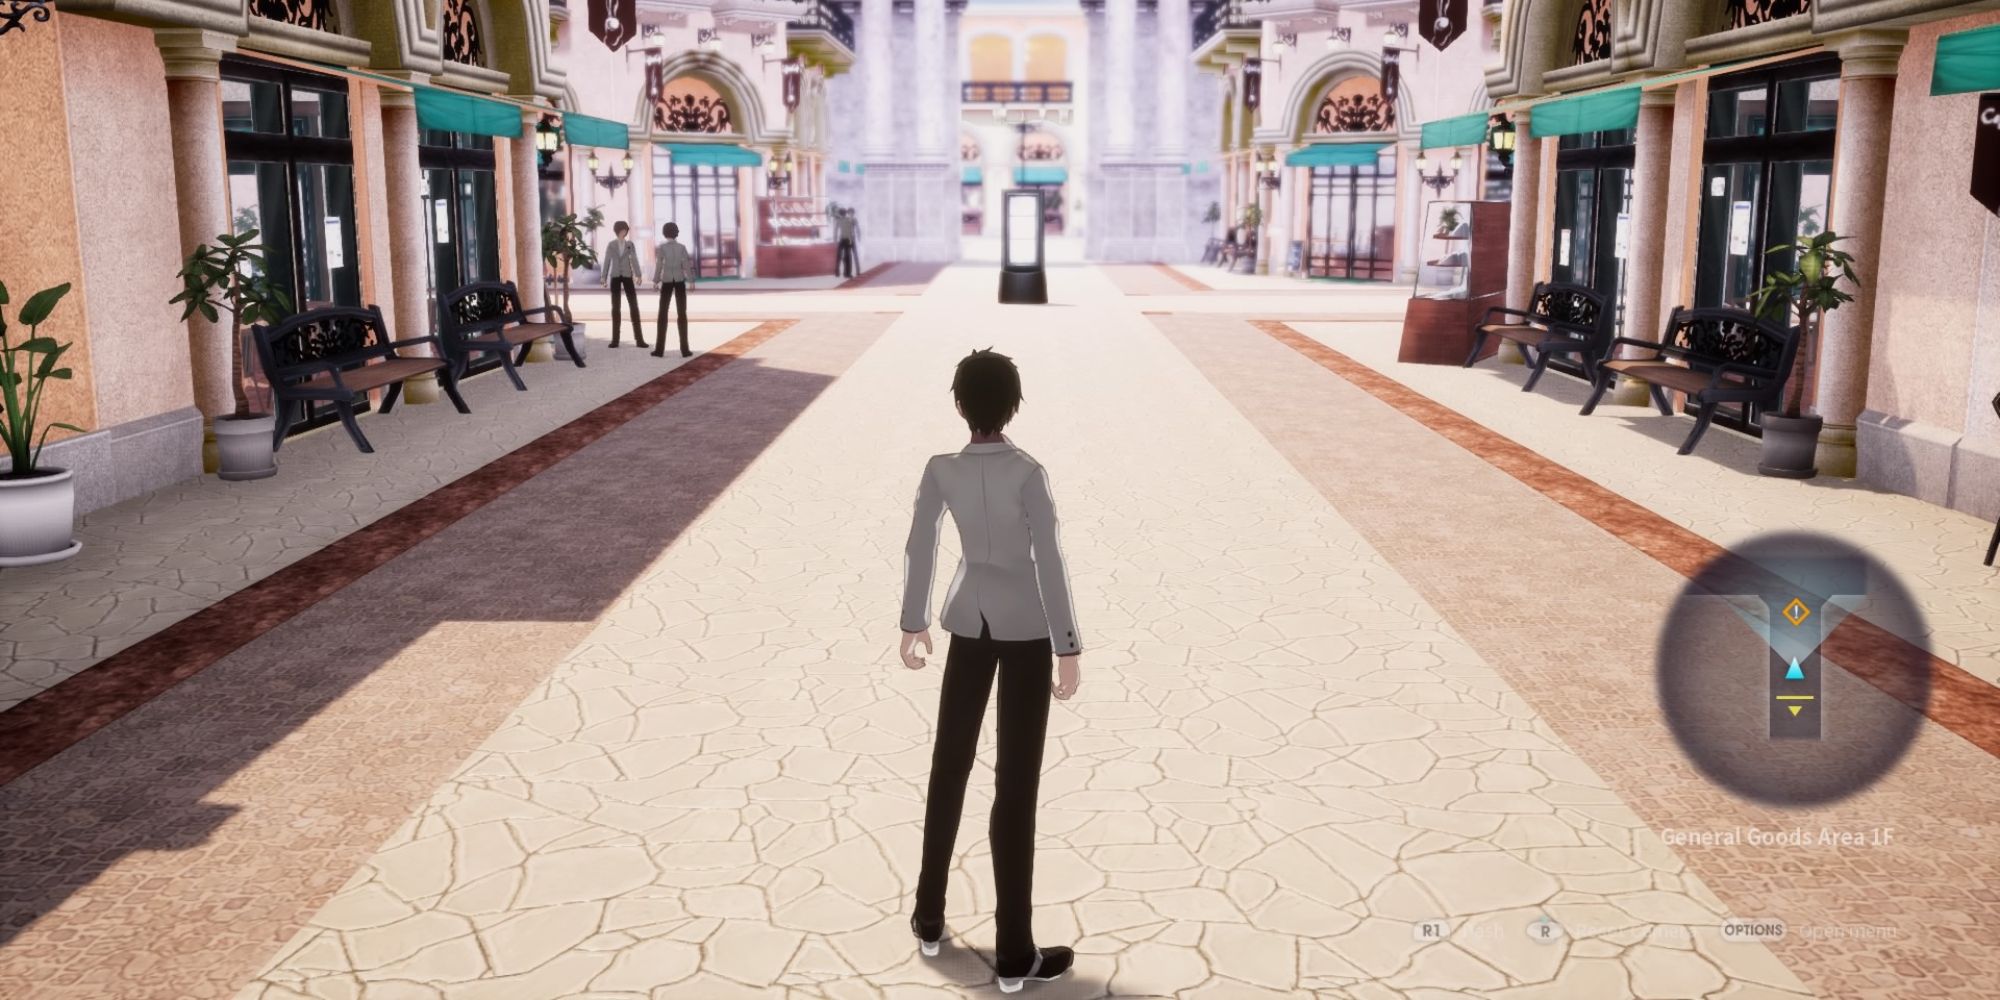 a shot of the player character from The Caligula Effect standing in a dungeon that resembles a shopping mall